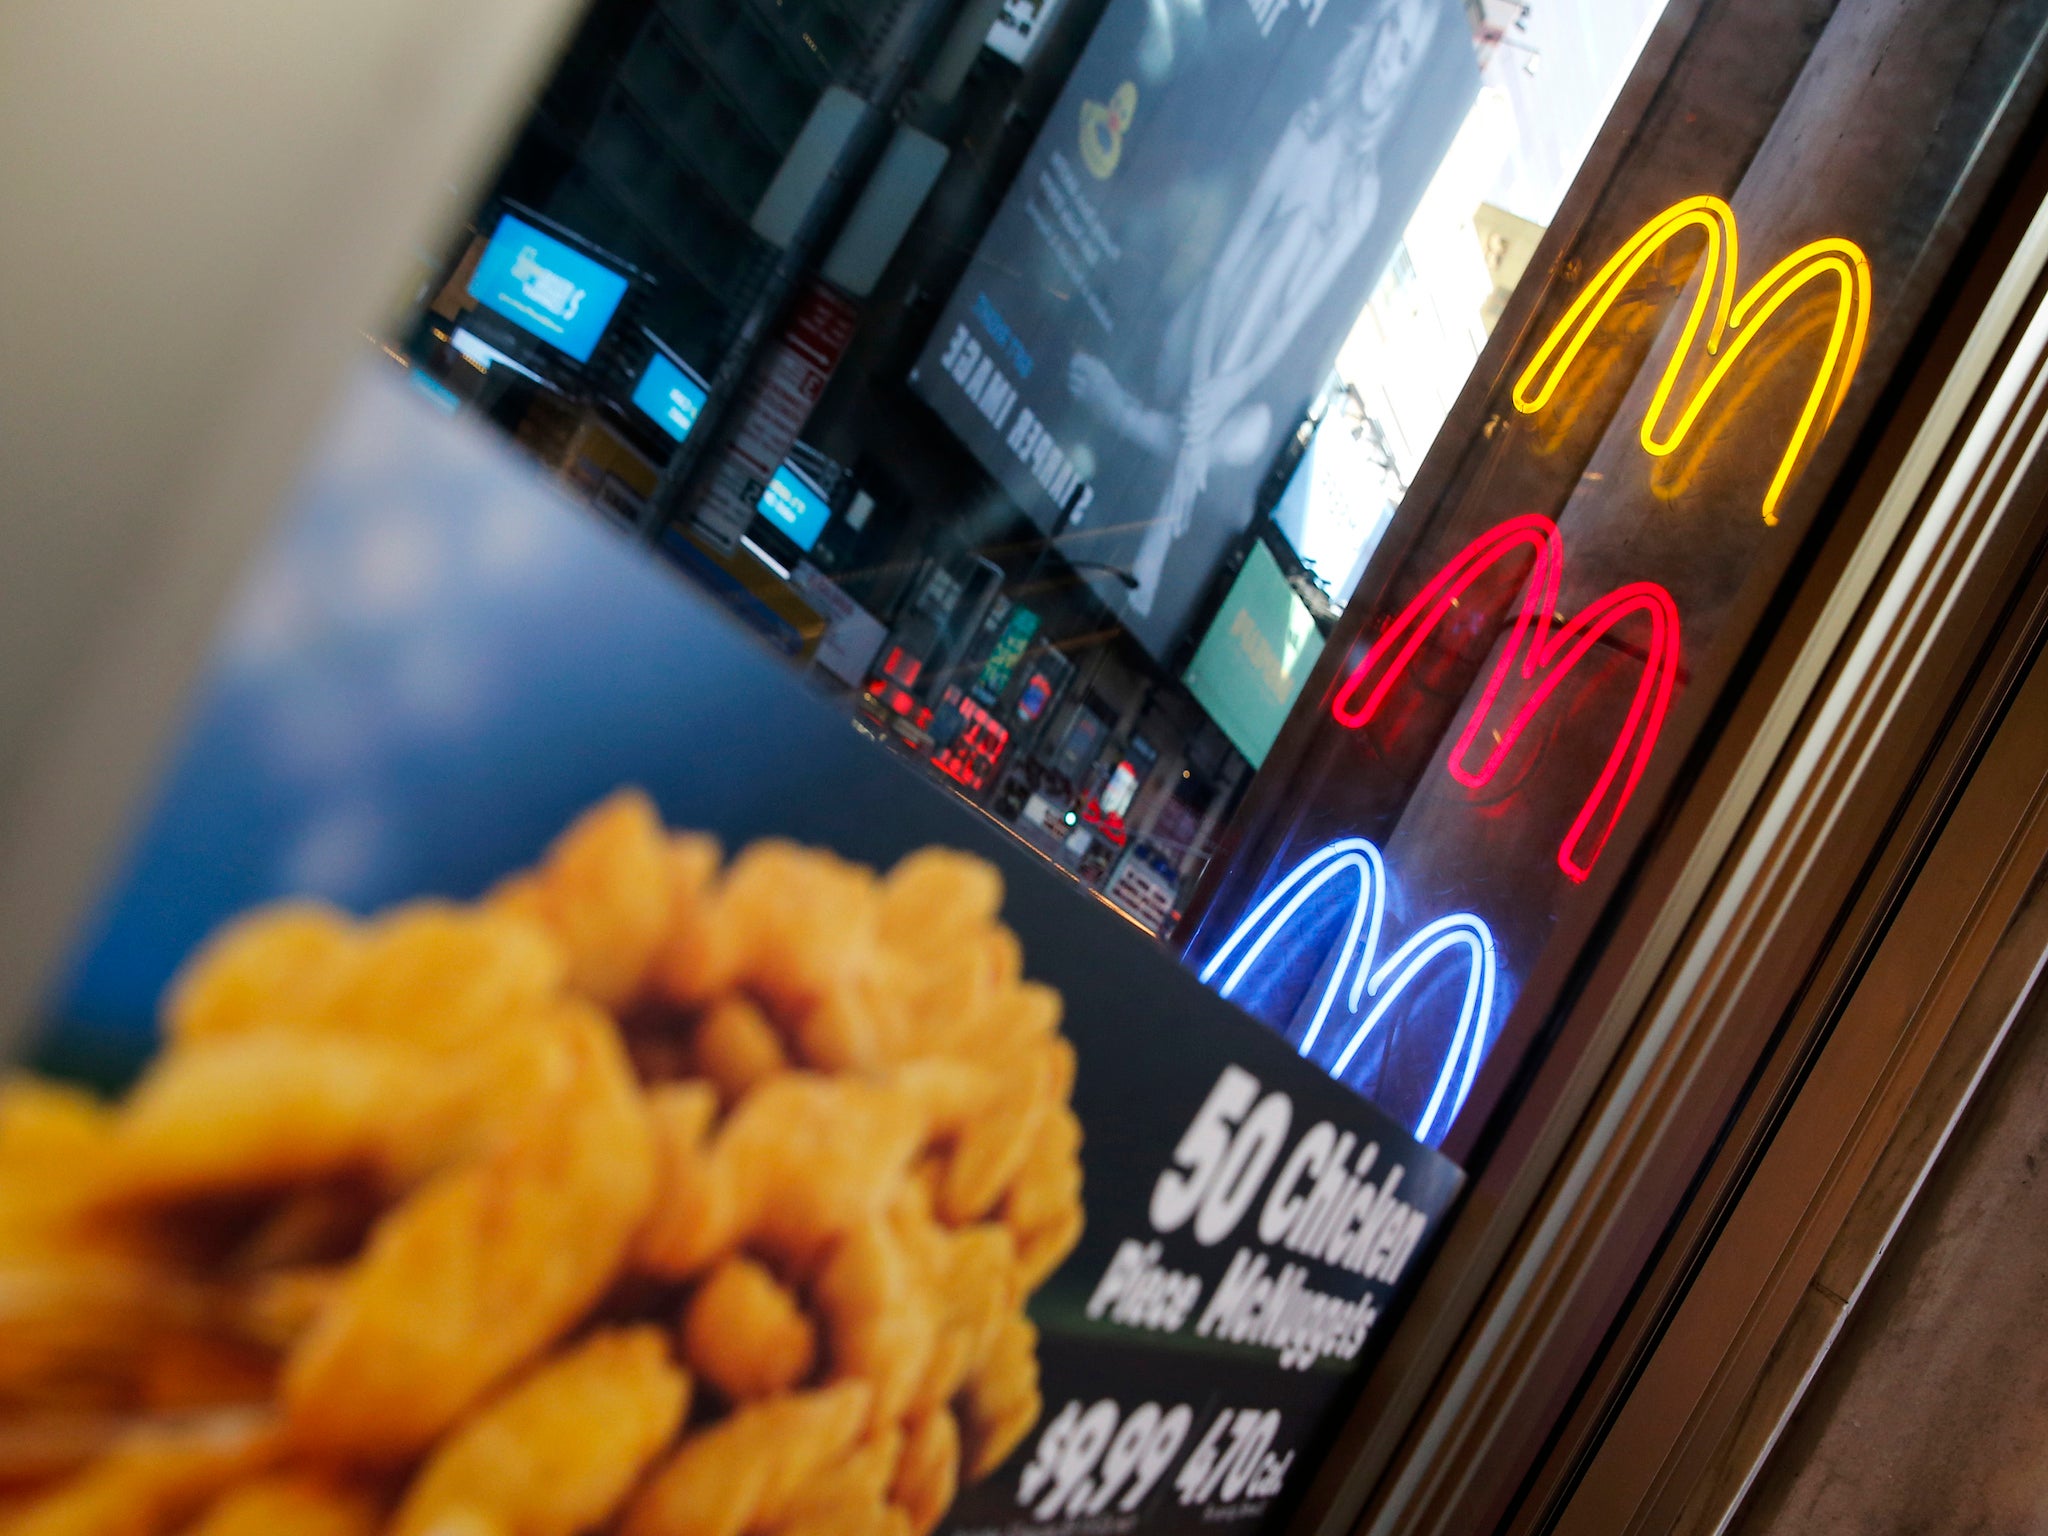 McDonald's is facing competition on many new fronts